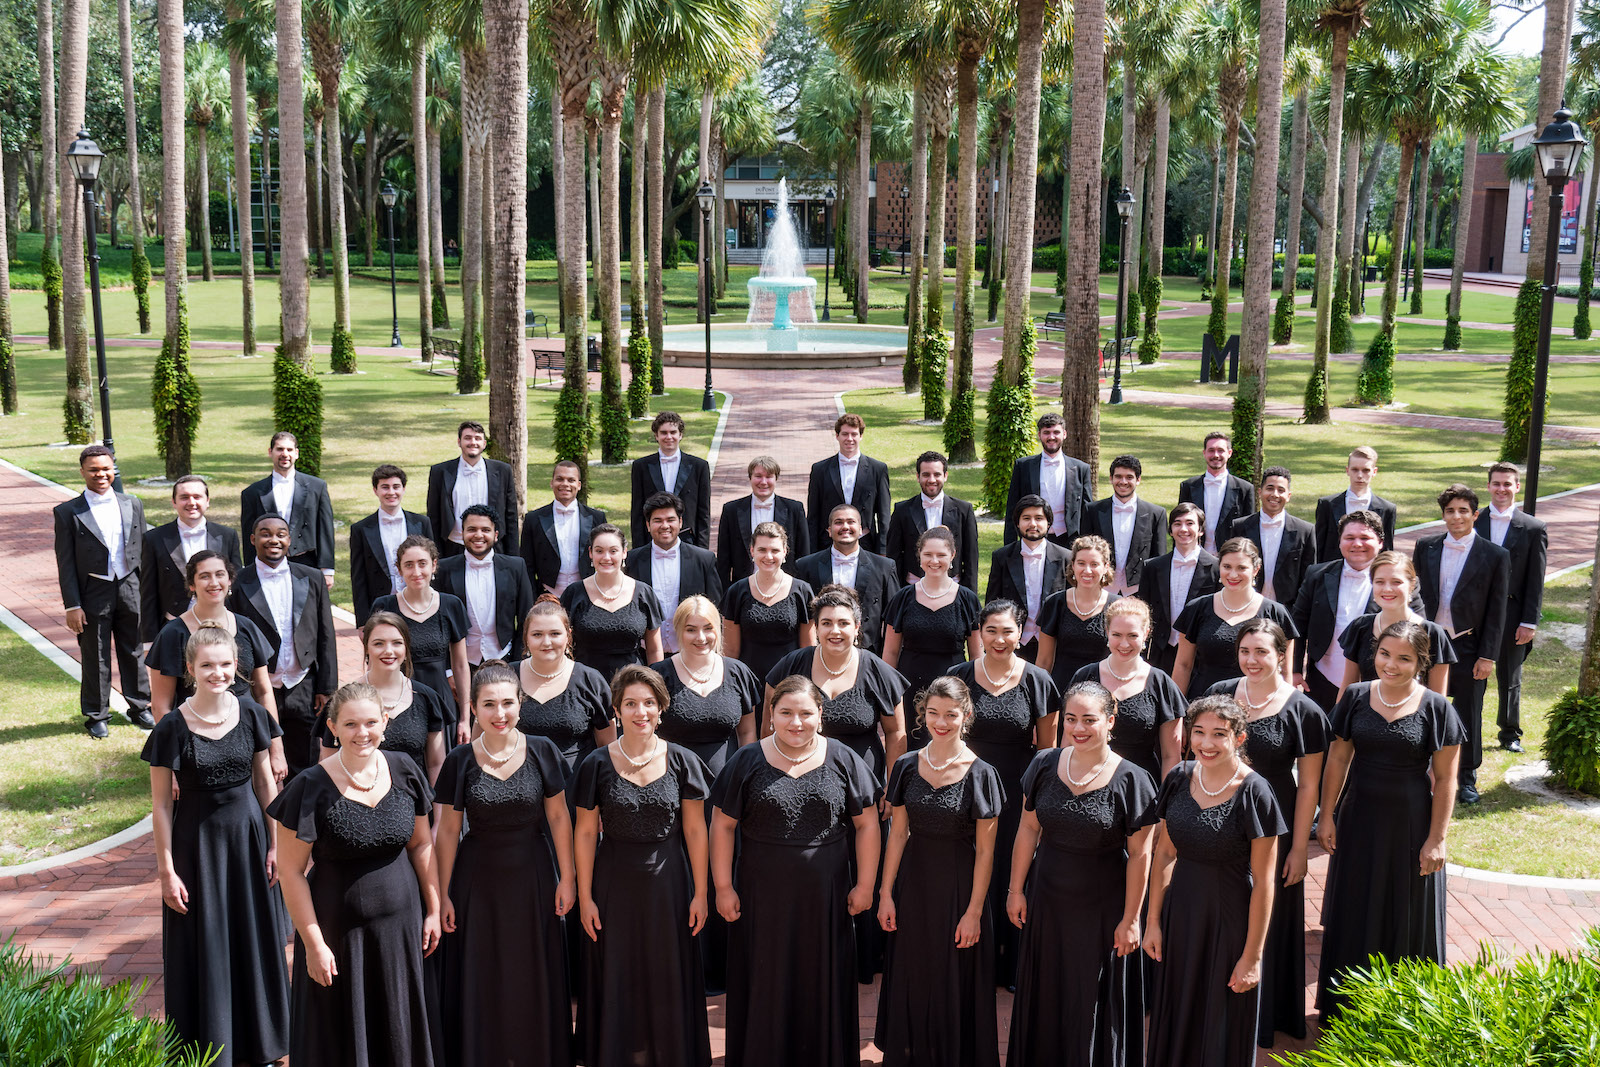 Big group shot of the entire choir in black tuxes and black gowns standing in front of the fountain in Palm Court.